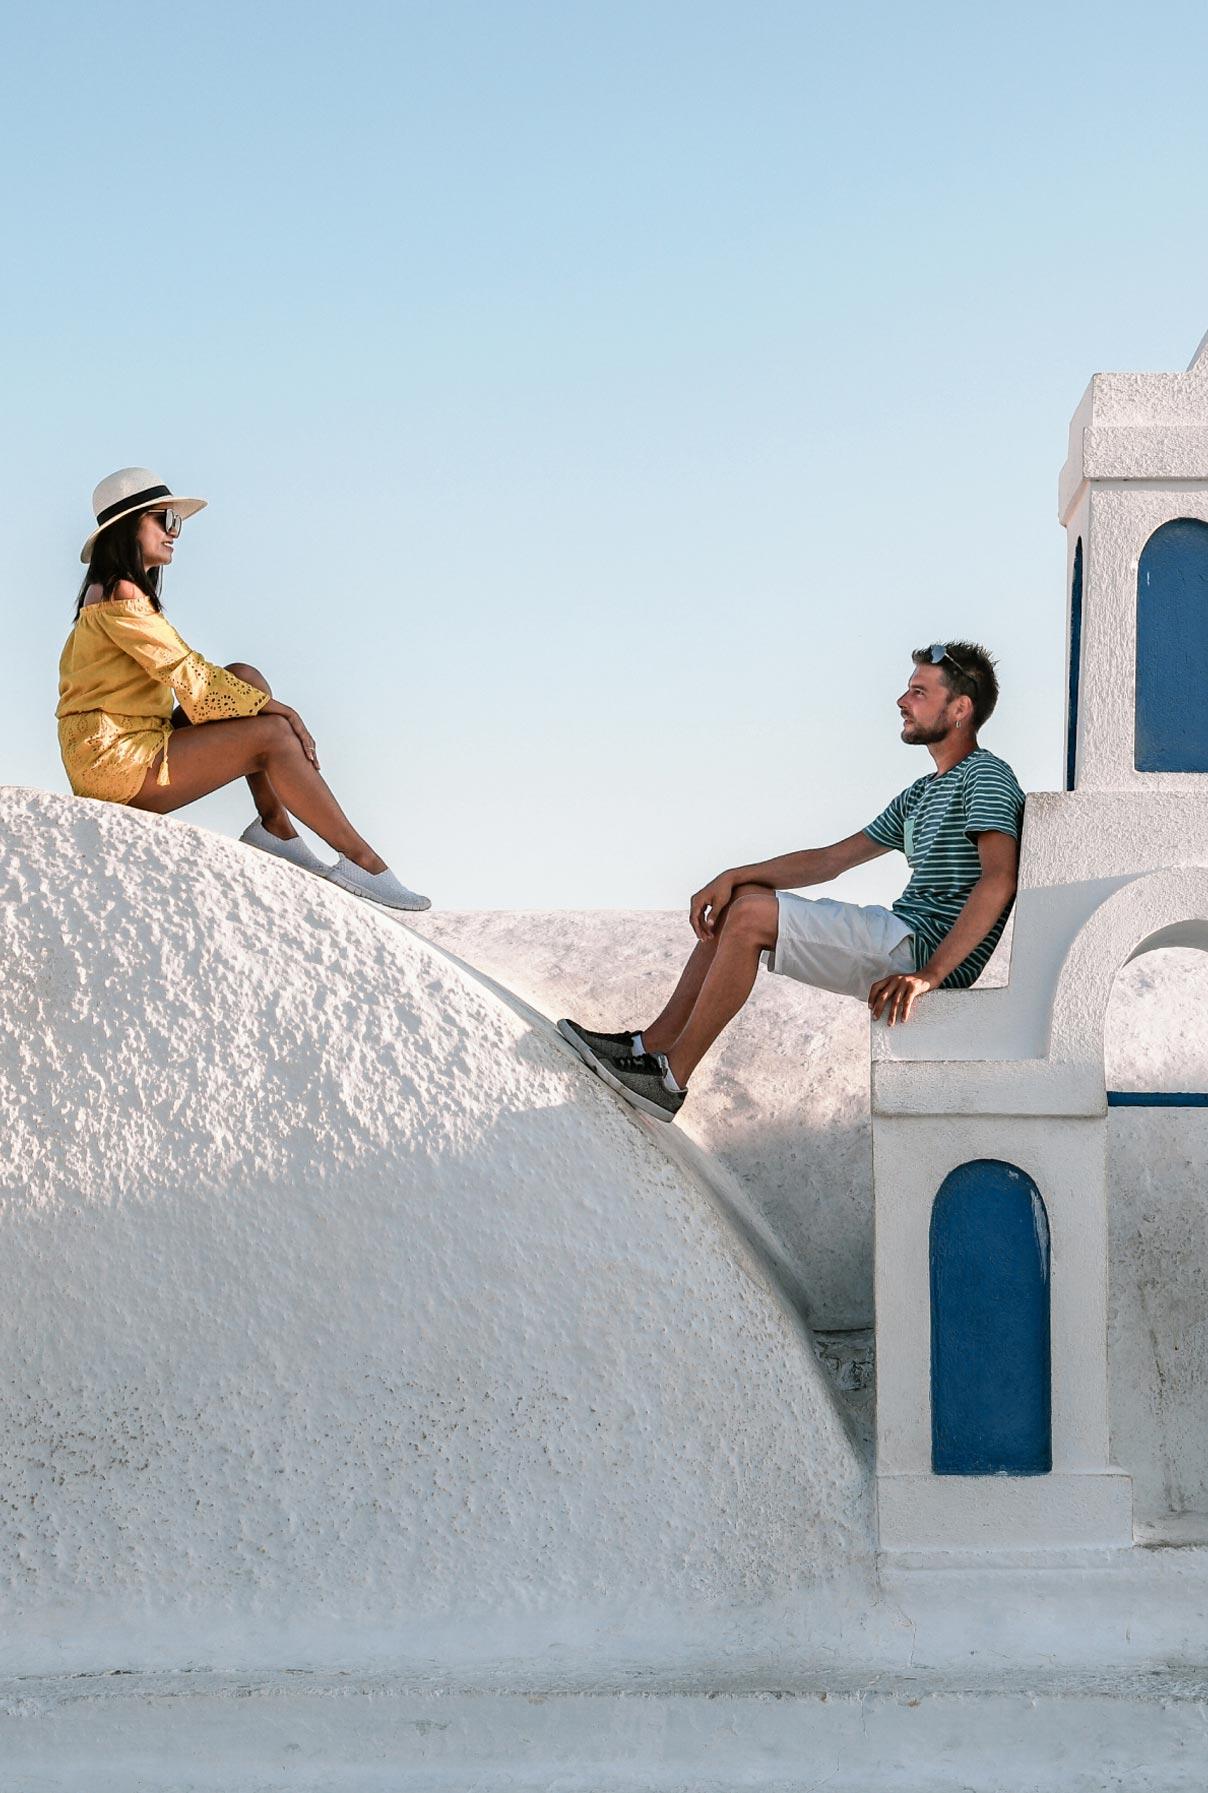 Yestay Hotels | Escaping the Ordinary in Greece